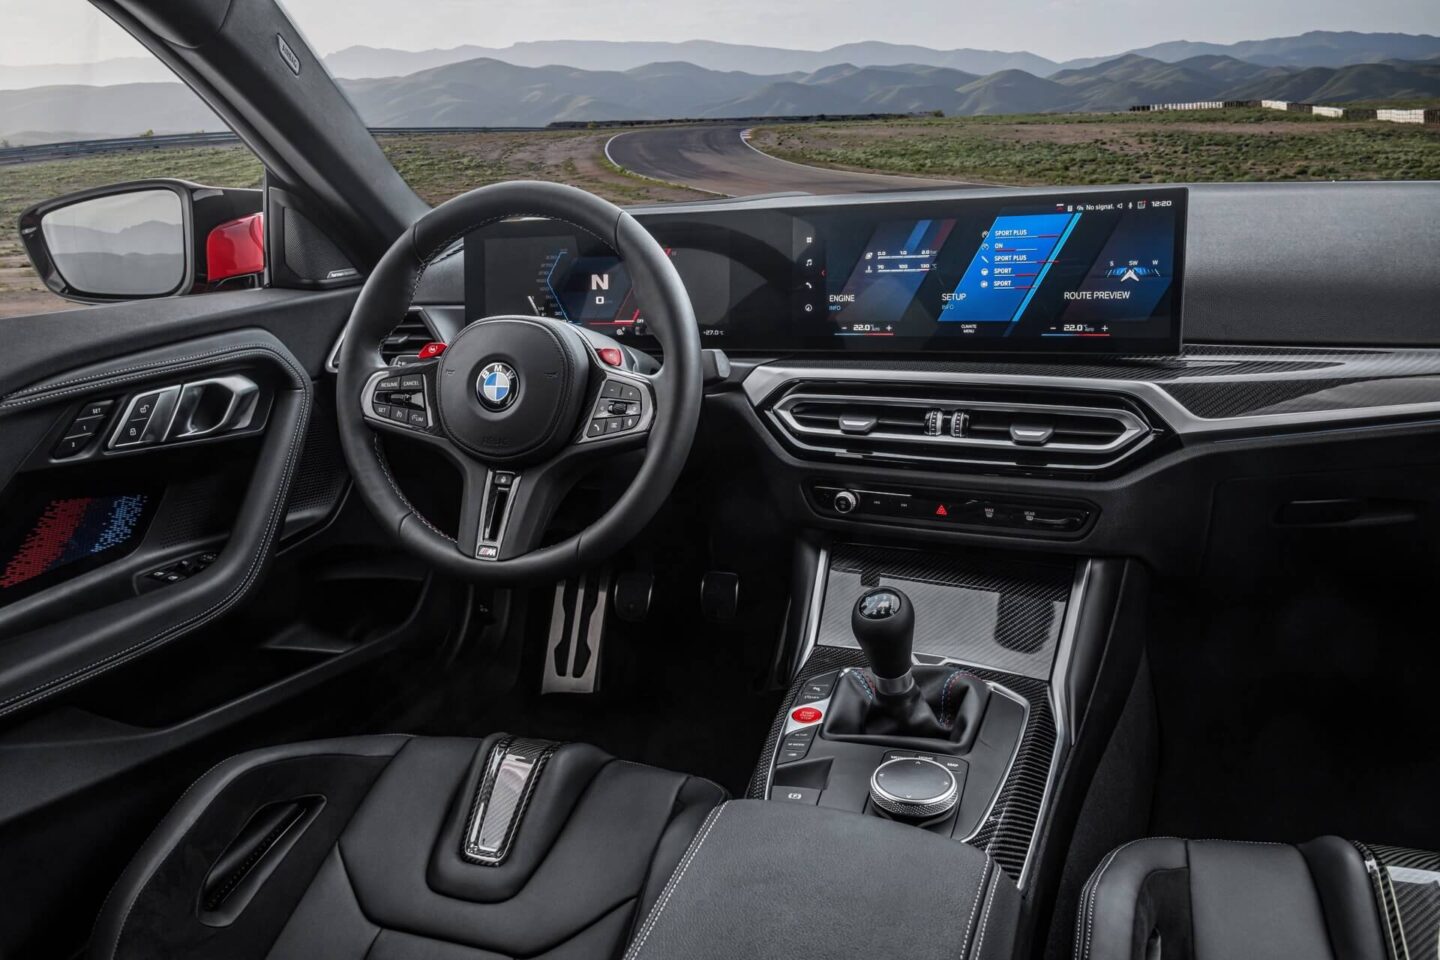 The interior of the BMW M2